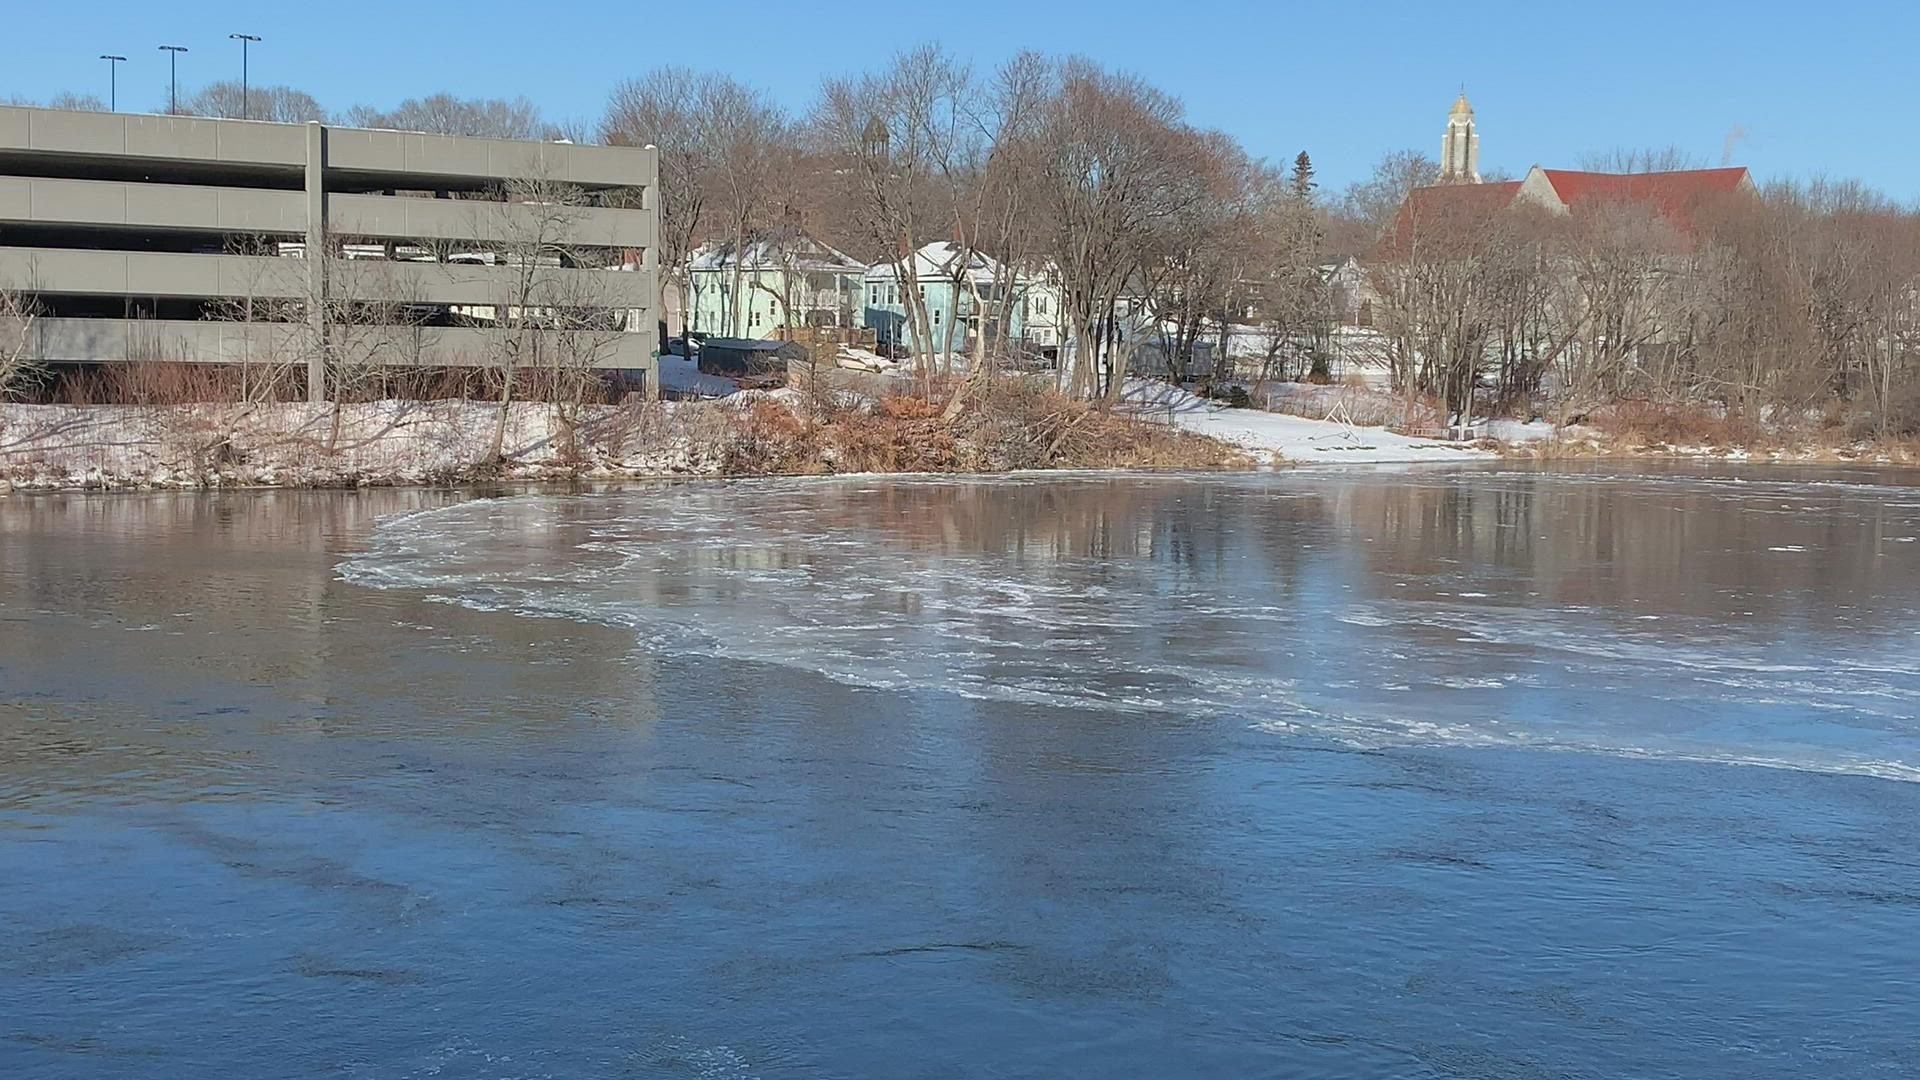 When a massive ice disk formed on the Presumpscot River in Westbrook 3 years ago, it quickly became a phenomenon. It now appears the famed disk has returned.